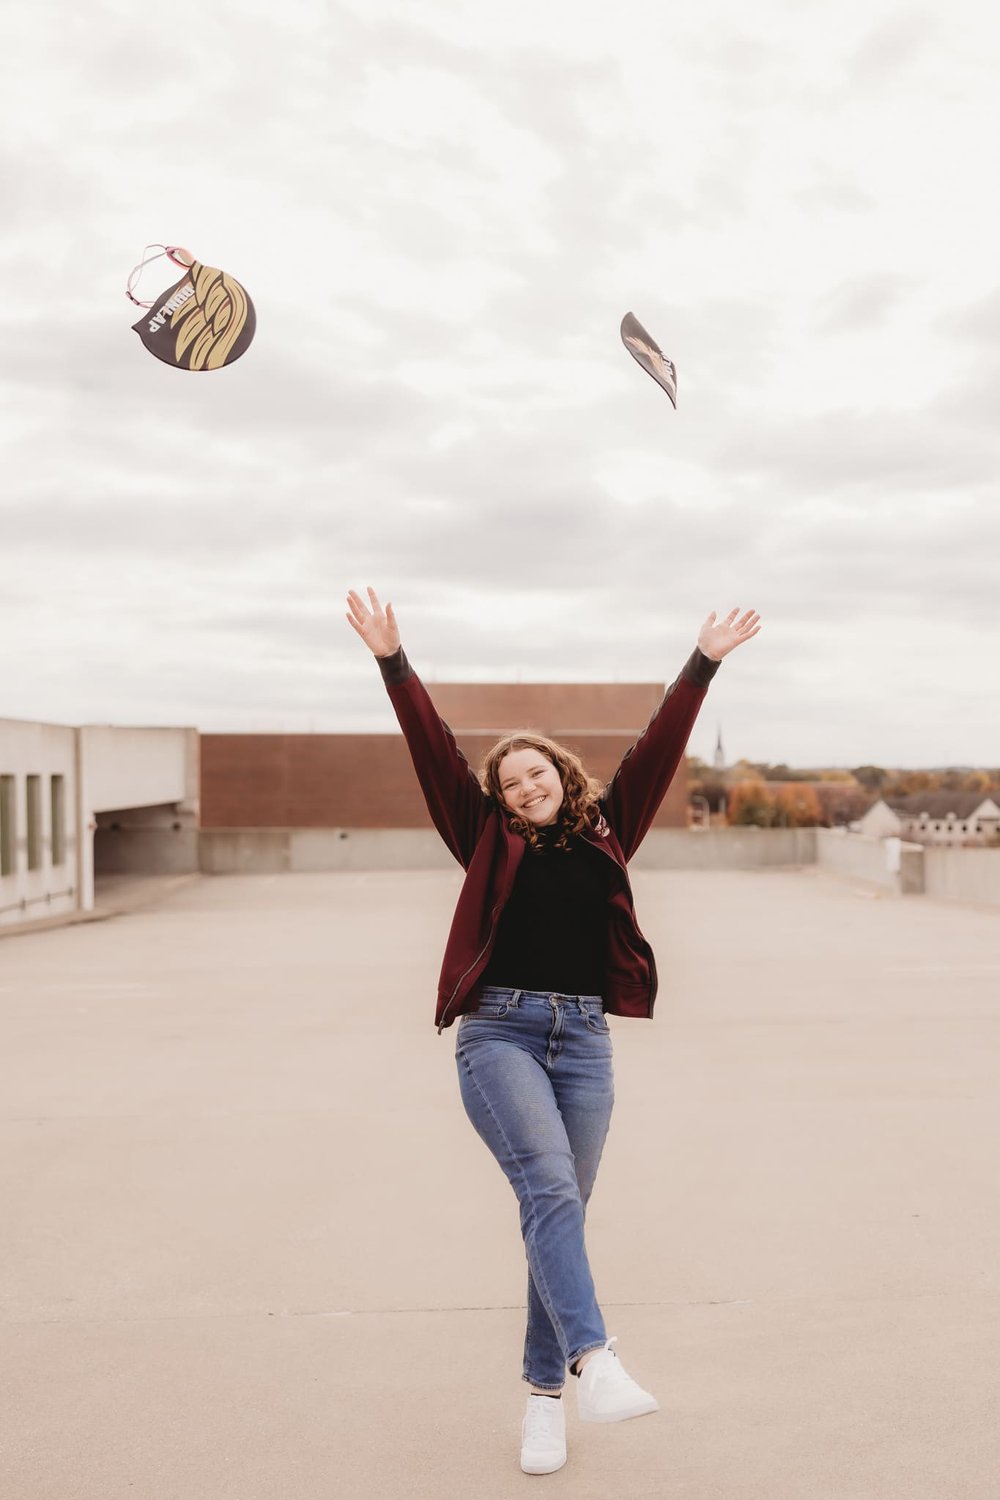  a young girl throws a high school activity accessory in the air while kicking a foot up   